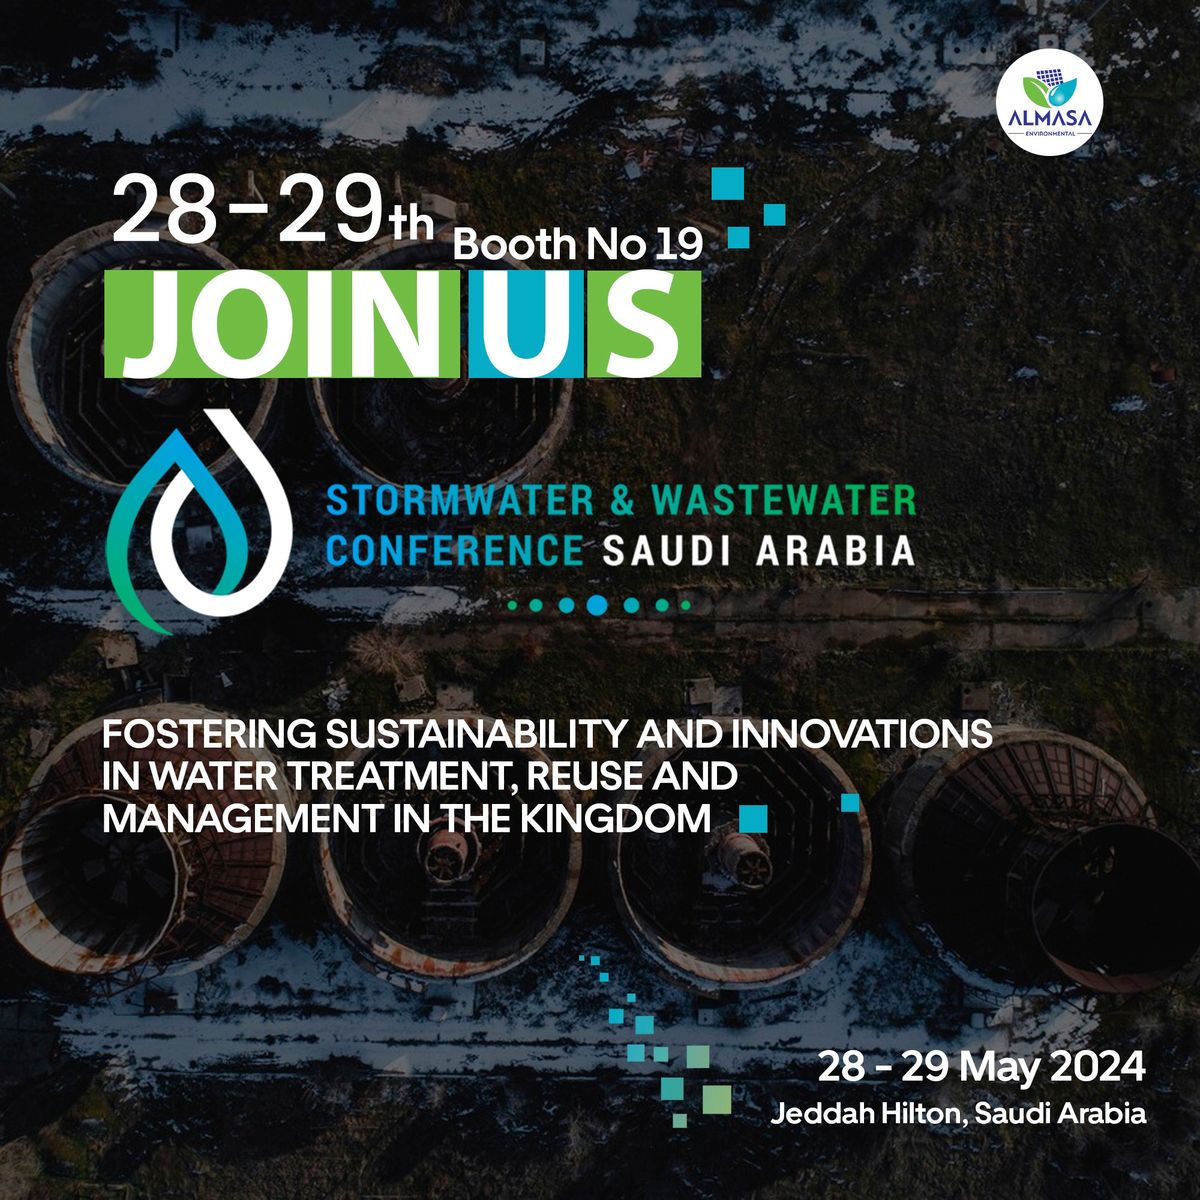 Stormwater and Wastewater Conference Saudi Arabia